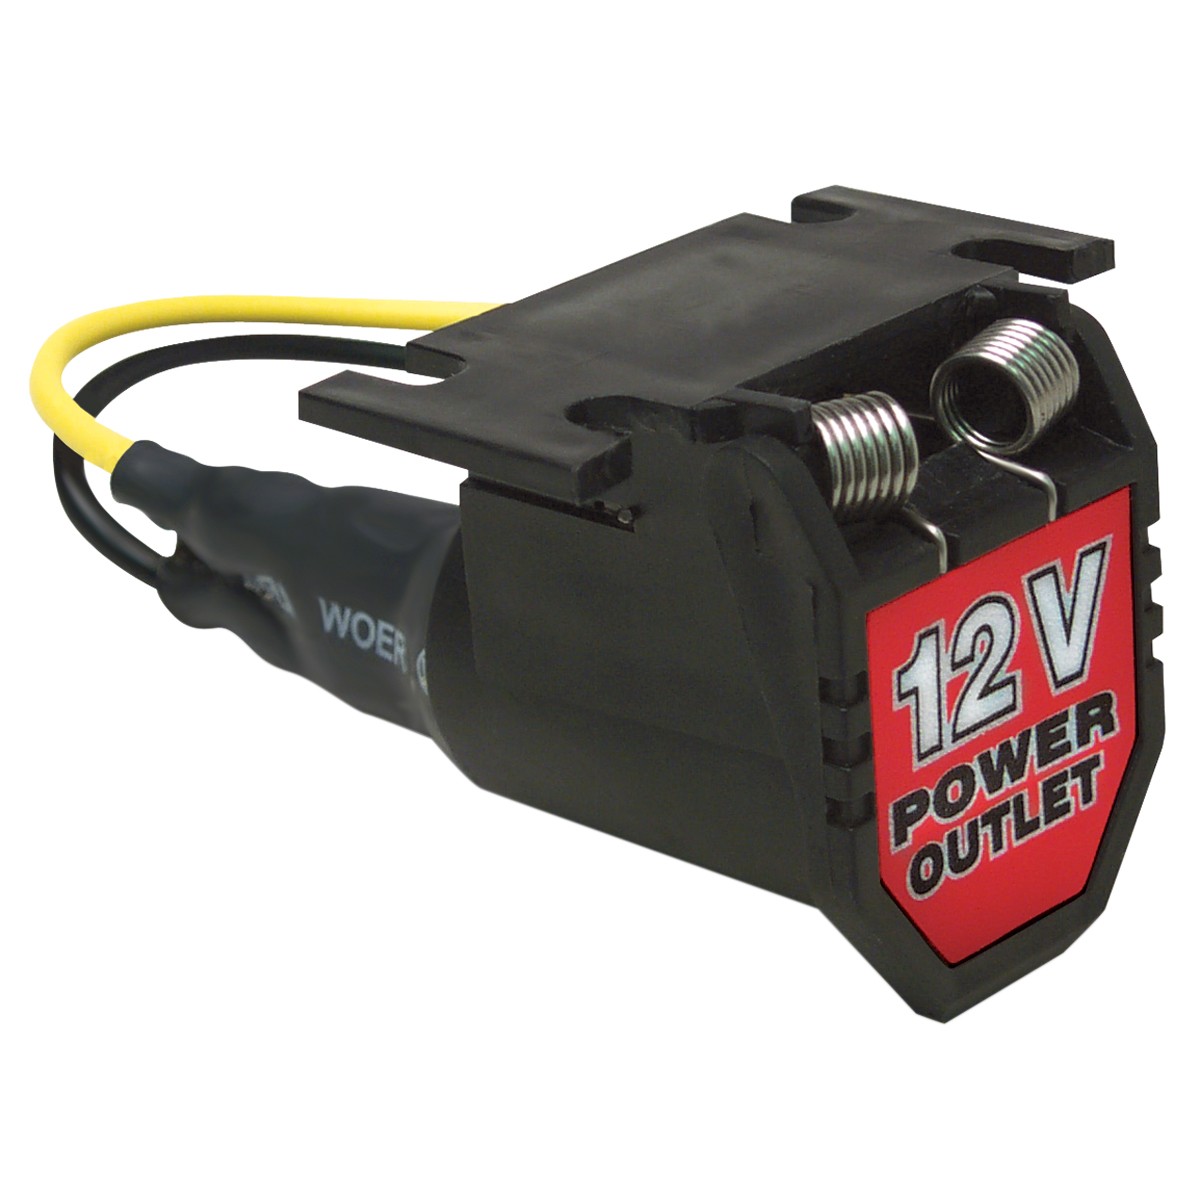 POWER OUTLET 12V EXTENSION 6 FT CORD